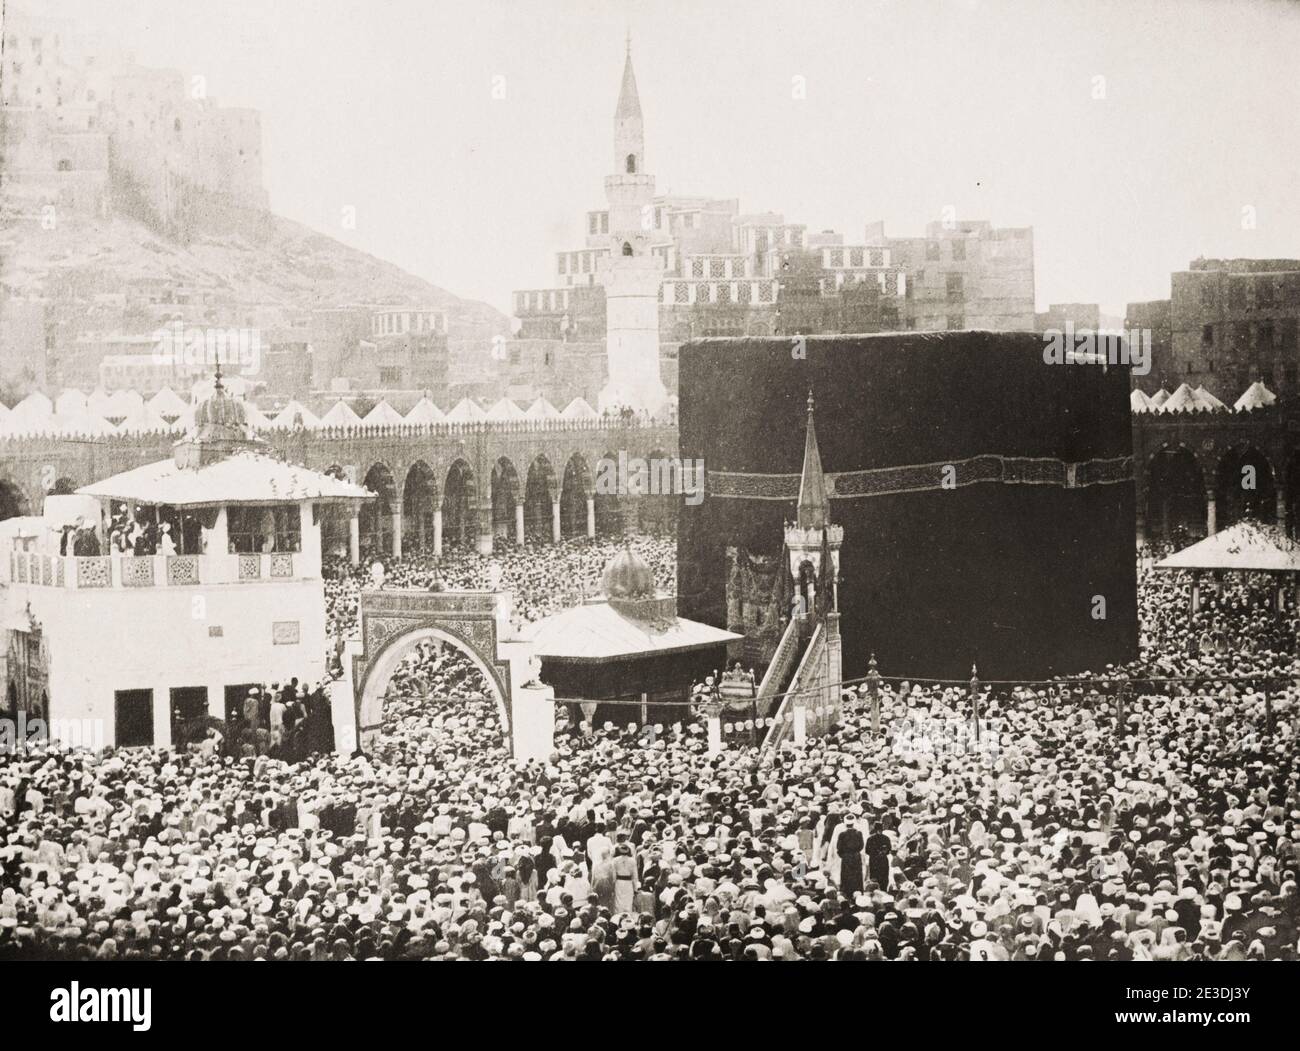 Vintage 19th century photograph: large crowd at the Kabaa, Mecca. The Kaaba, also spelled Ka'bah or Kabah, sometimes referred to as al-Kaʿbah al-Musharrafah, is a building at the center of Islam's most important mosque, the Masjid al-Haram in Mecca, Saudi Arabia. It is the most sacred site in Islam. Stock Photo